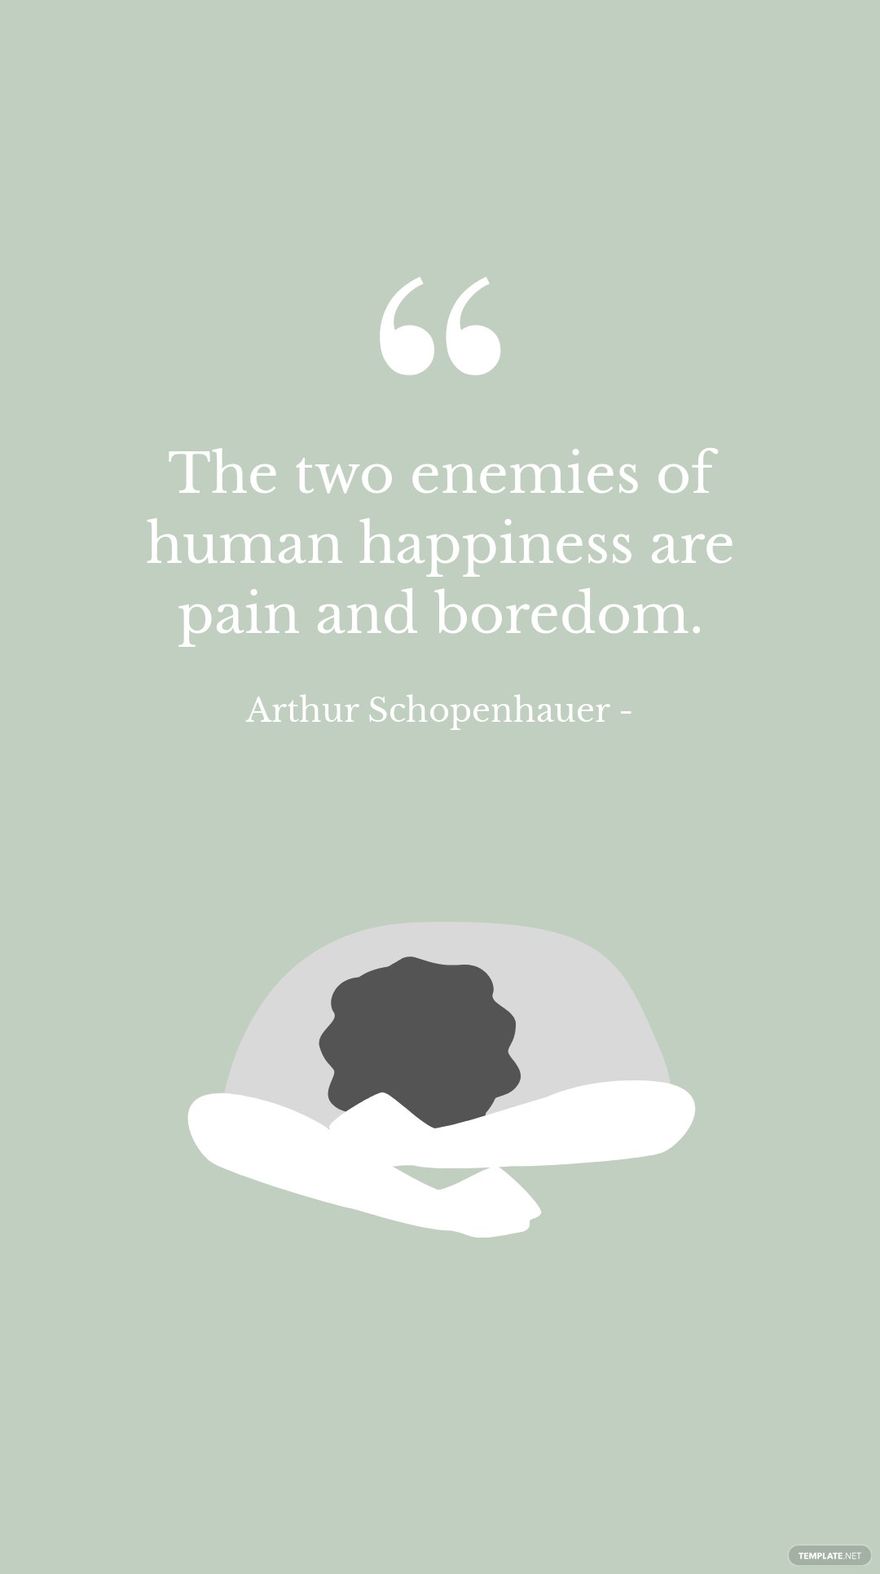 Free Arthur Schopenhauer - The two enemies of human happiness are pain and boredom. in JPG